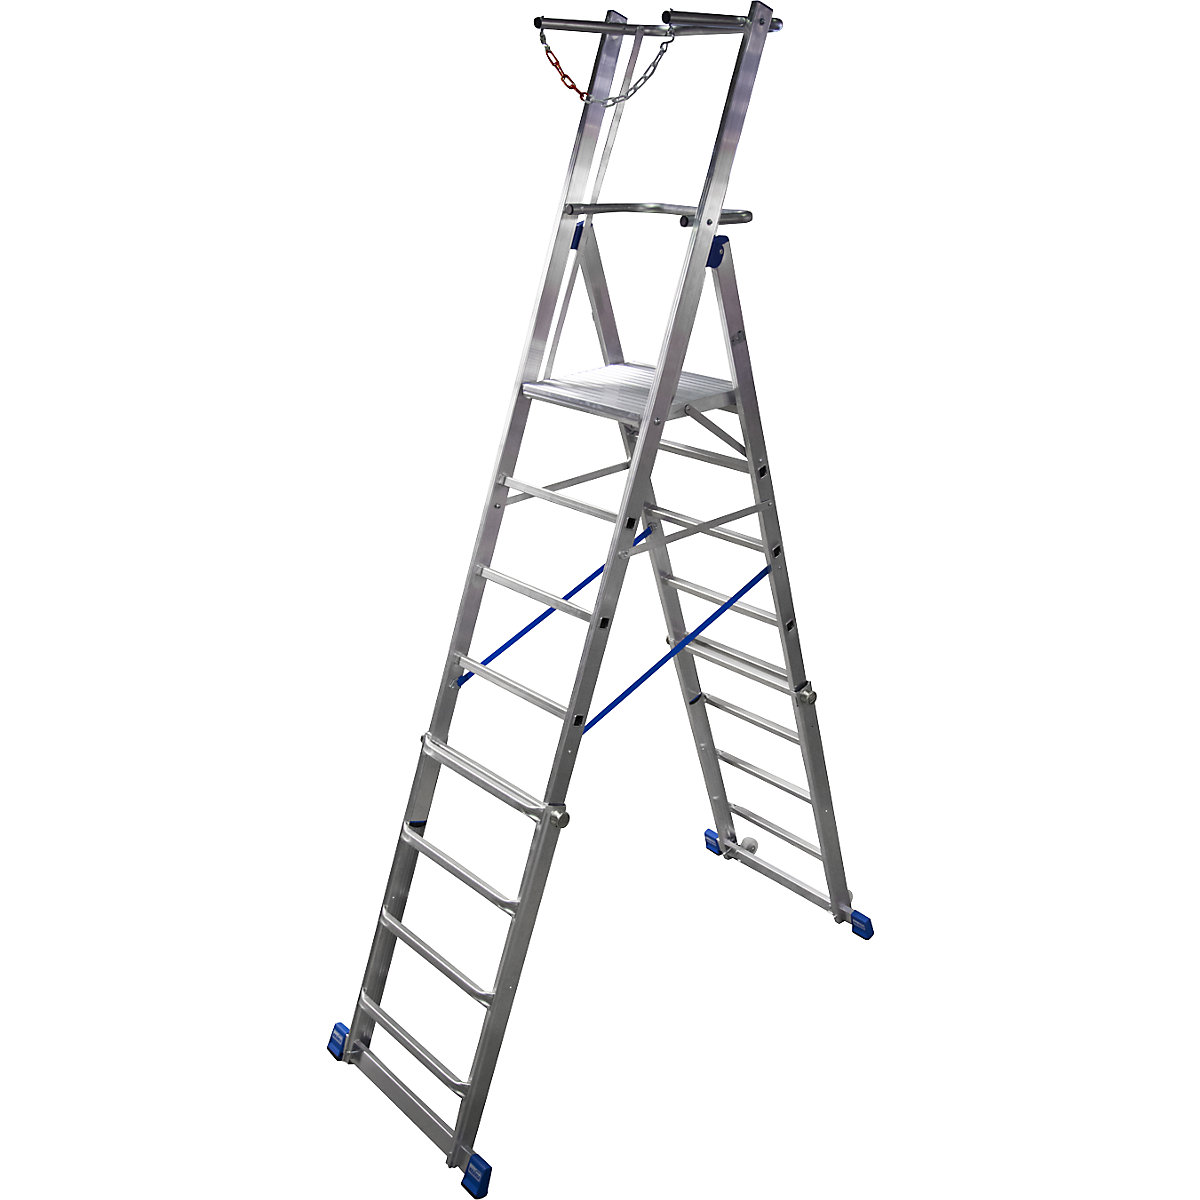 Telescopic mobile safety steps - KRAUSE